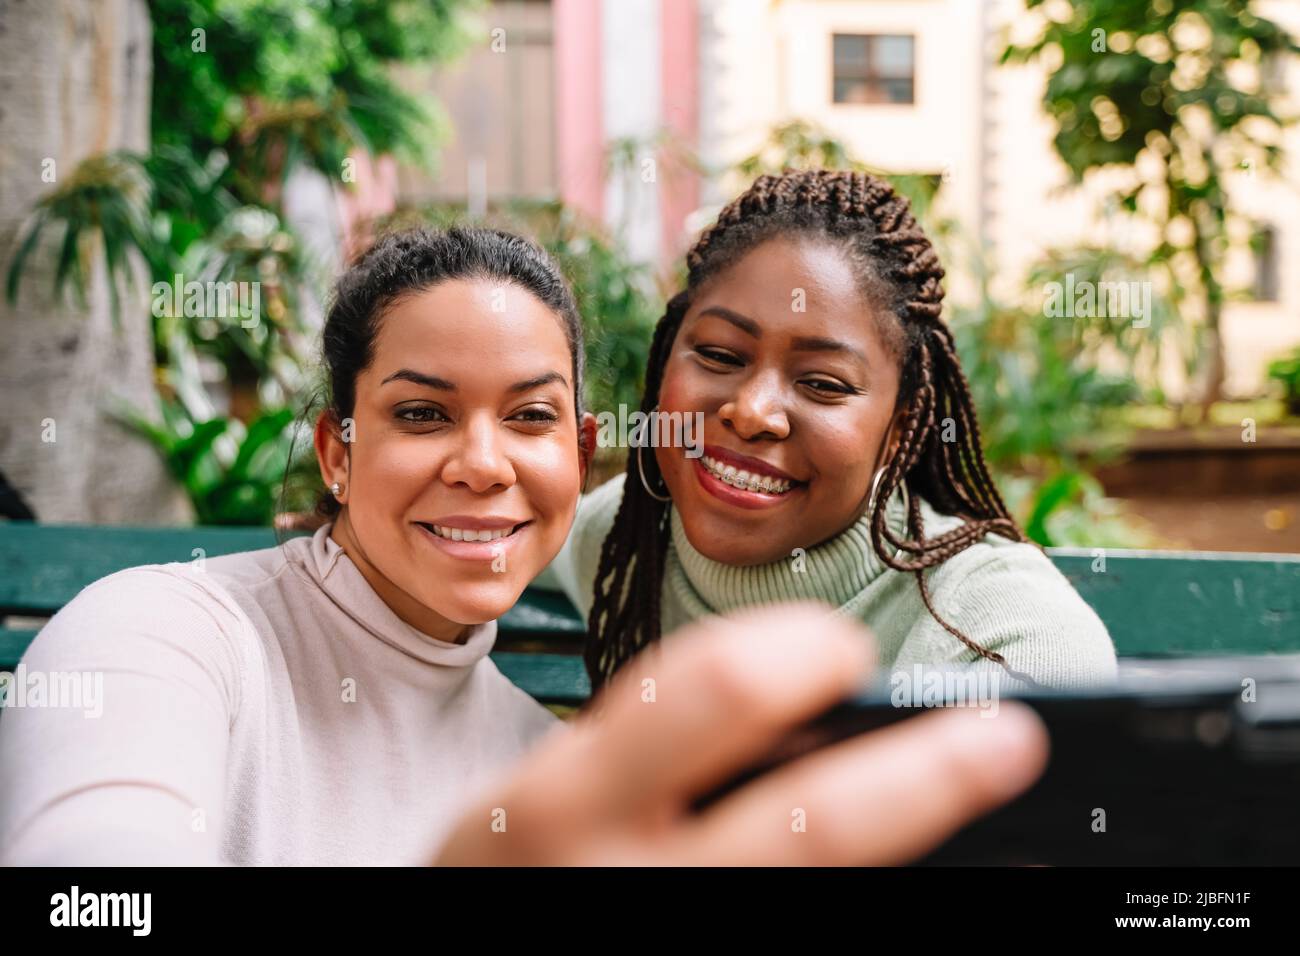 Cheerful black woman in sweater laughing and taking selfie with Hispanic girlfriend while sitting on bench in park Stock Photo